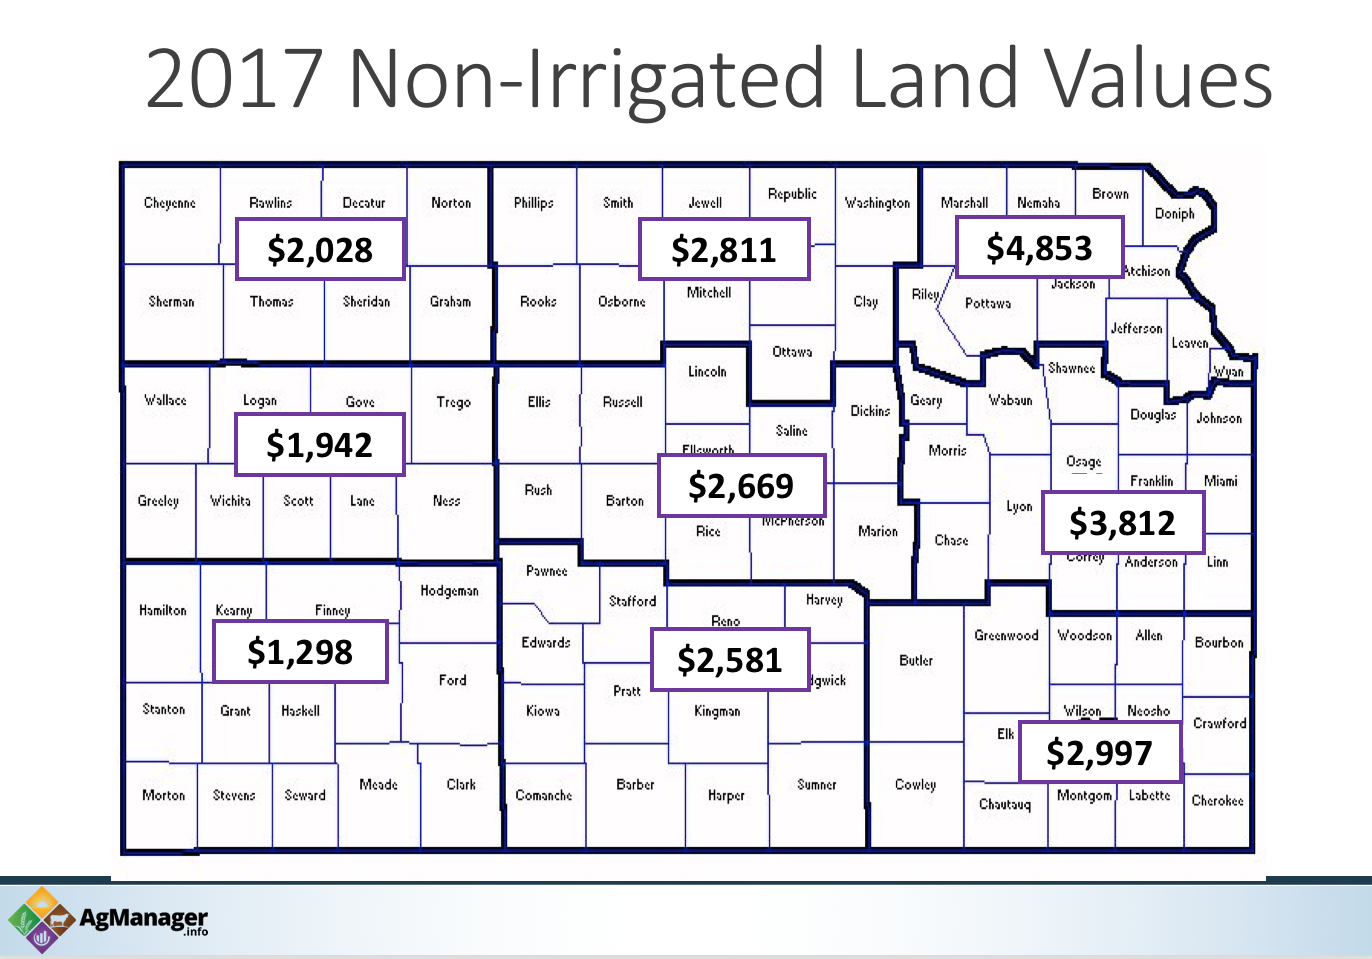 Map of non-irrigated land values in various parts of Kansas